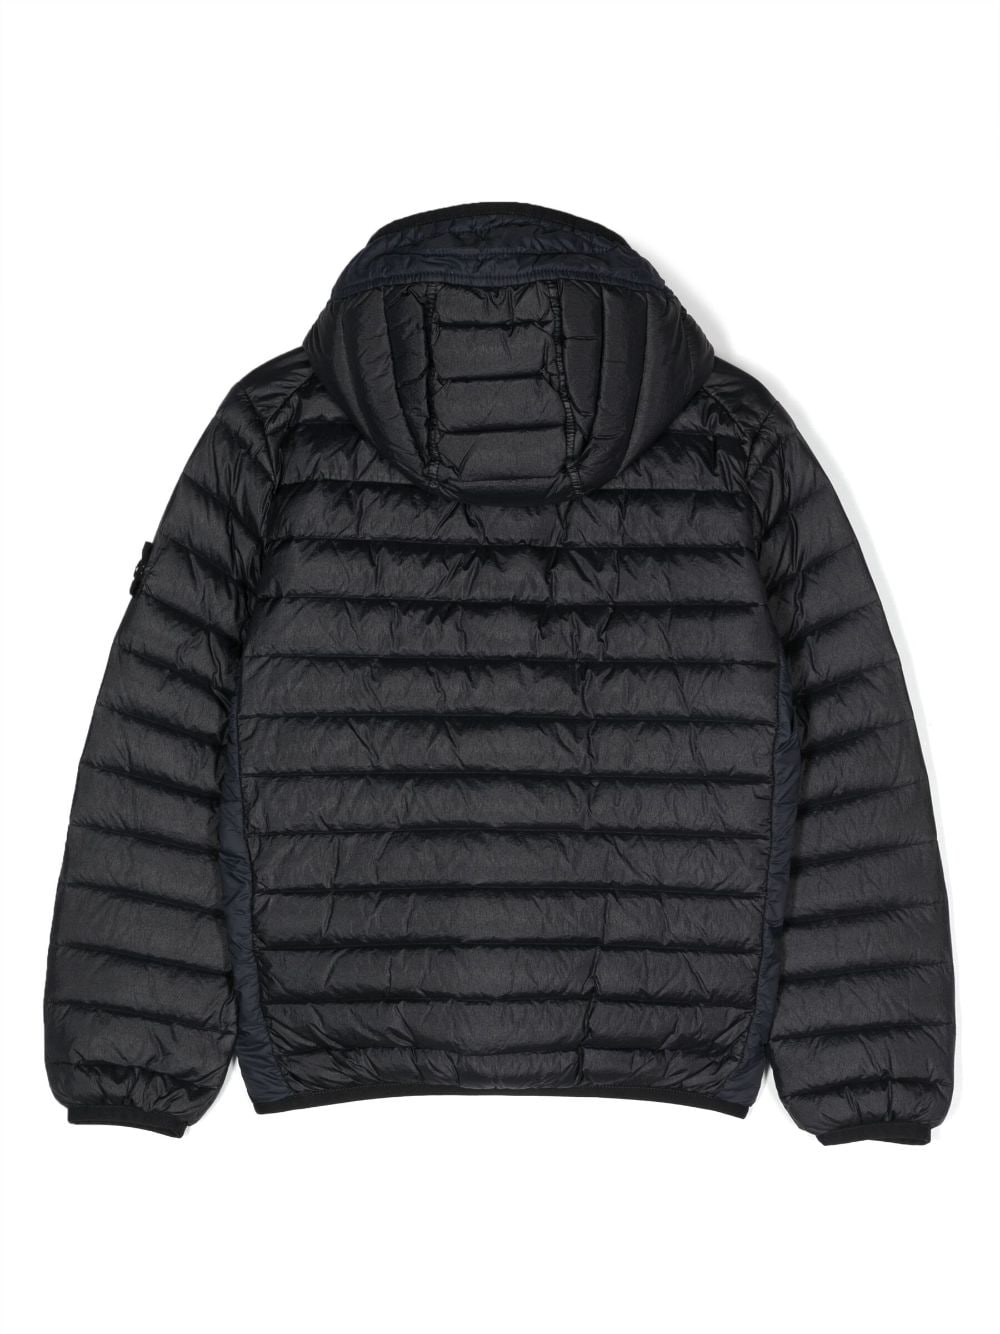 Compass-patch hooded padded jacket